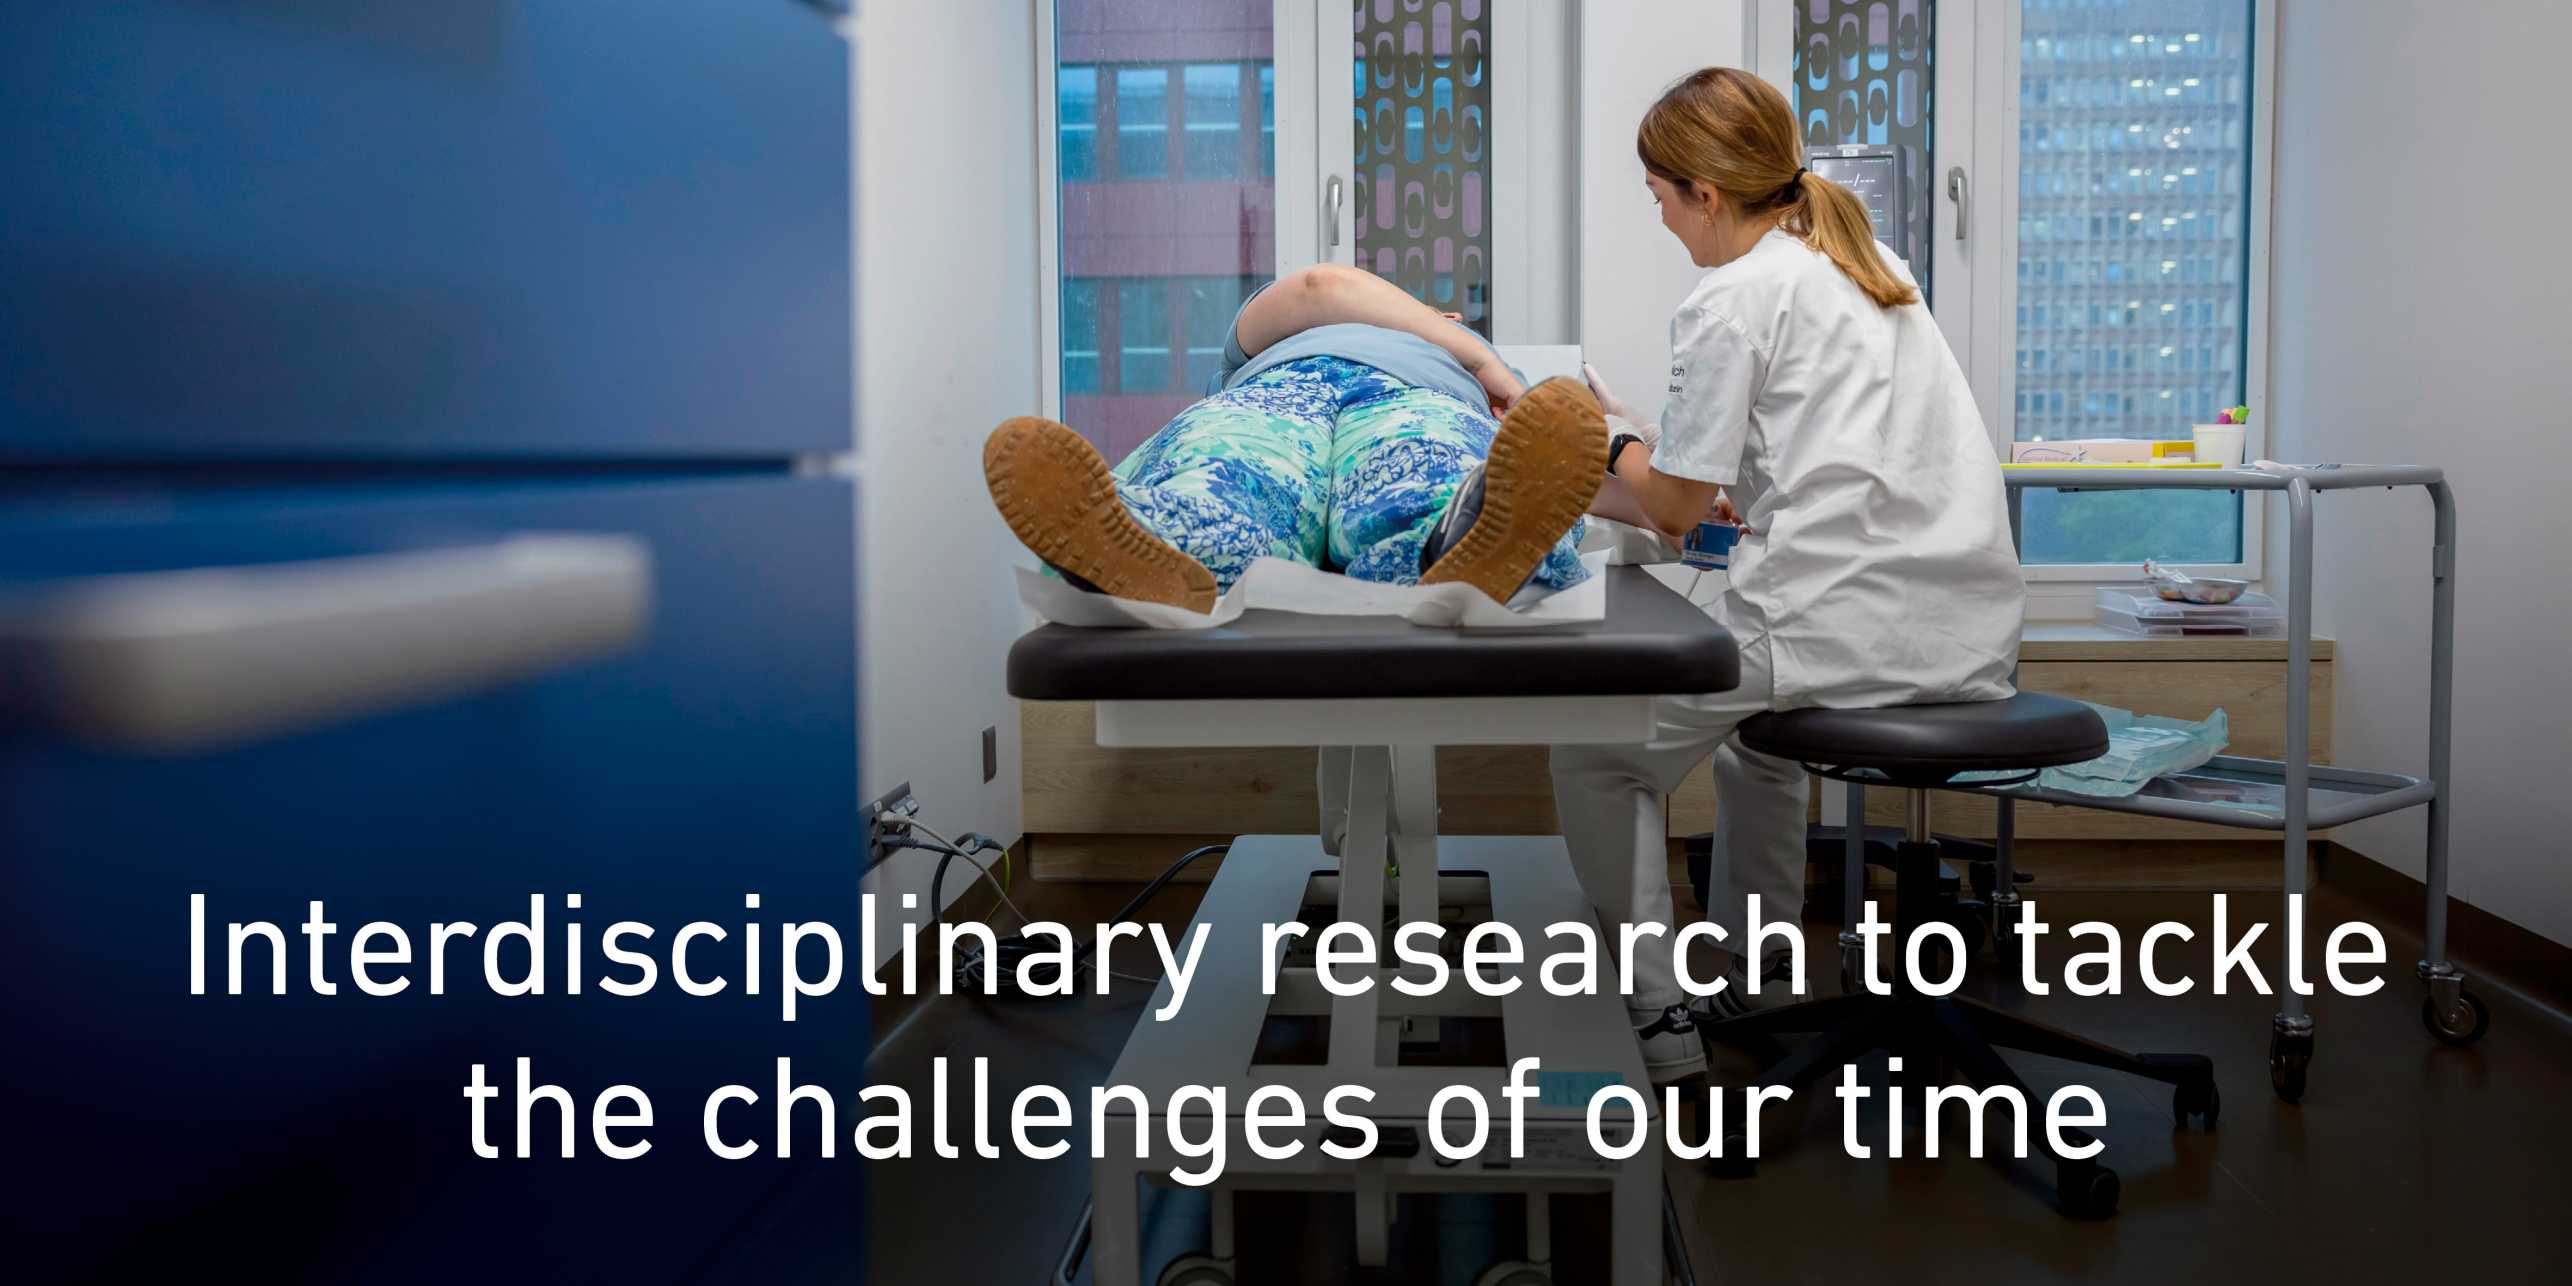 Interdisciplinary research for tackling the challenges of our time. Link to the website of the press release: More space for clinical research